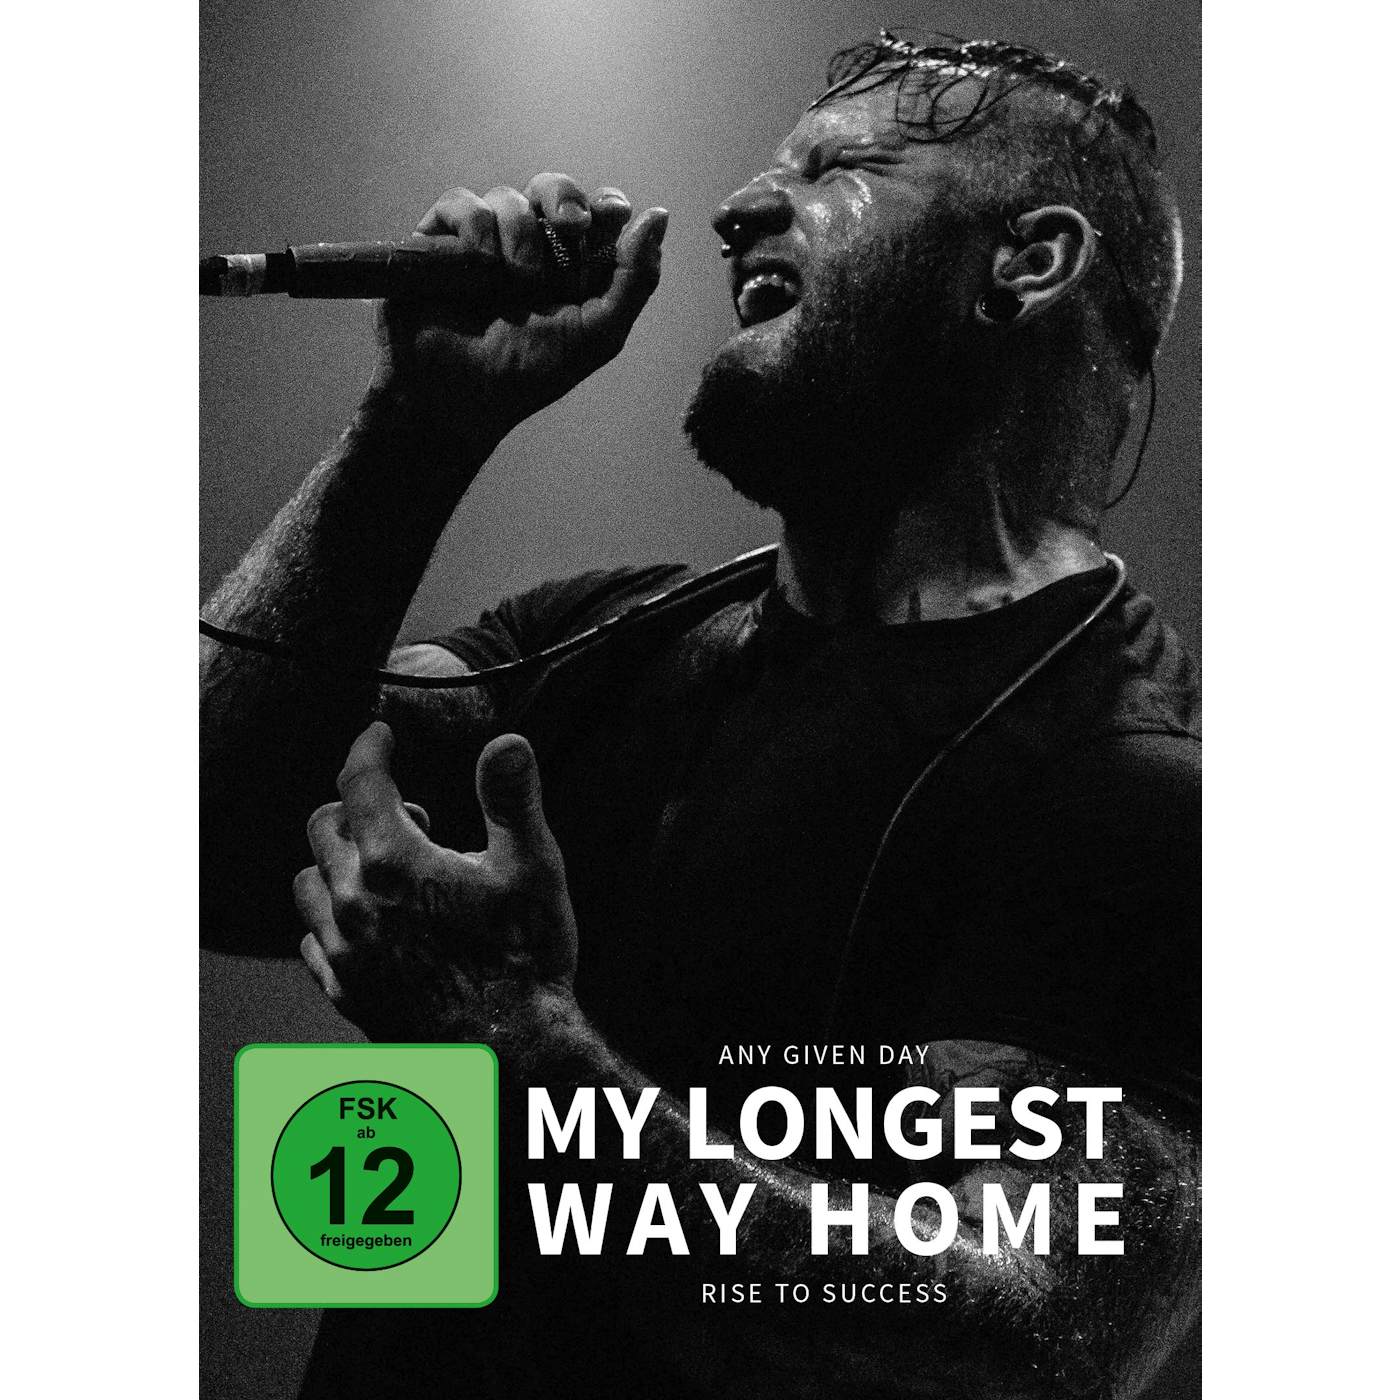 Any Given Day - My Longest Way Home - DVD (2016)